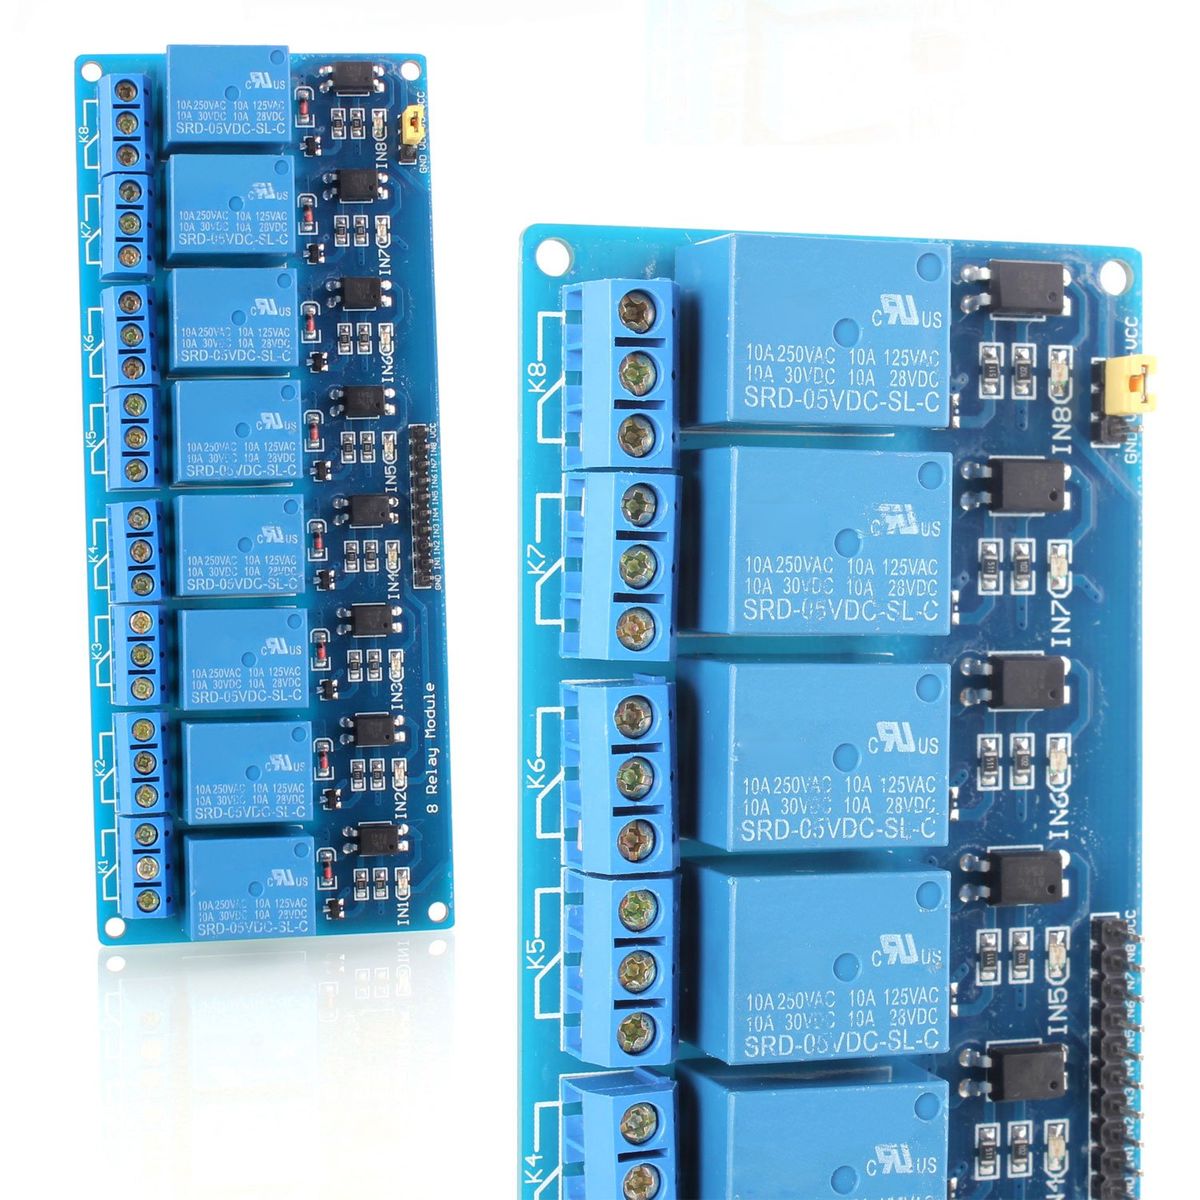 Neuftech 8-CH 5V 8-channel relay module board for Arduino PIC DSP AVR ARM relay module